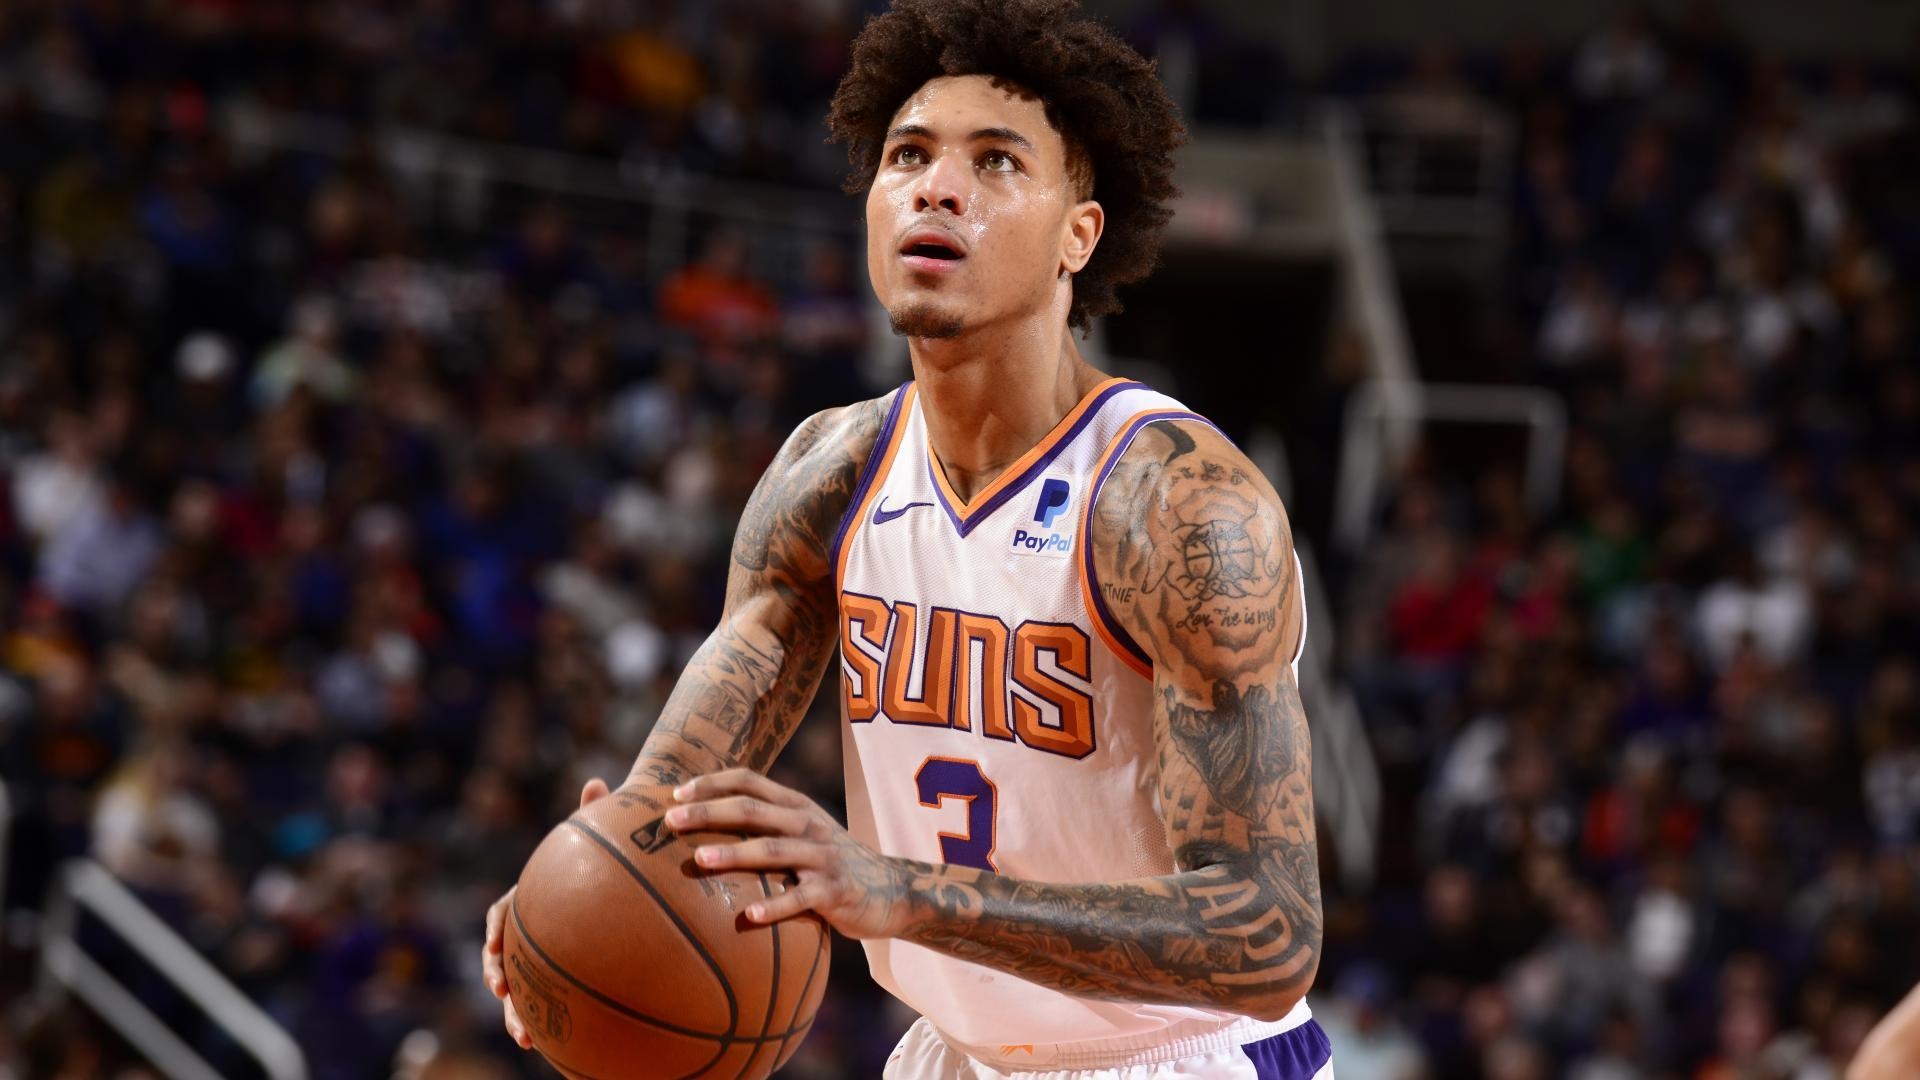 Kelly Oubre, Phoenix Suns, Contract extension, Player's return, 1920x1080 Full HD Desktop